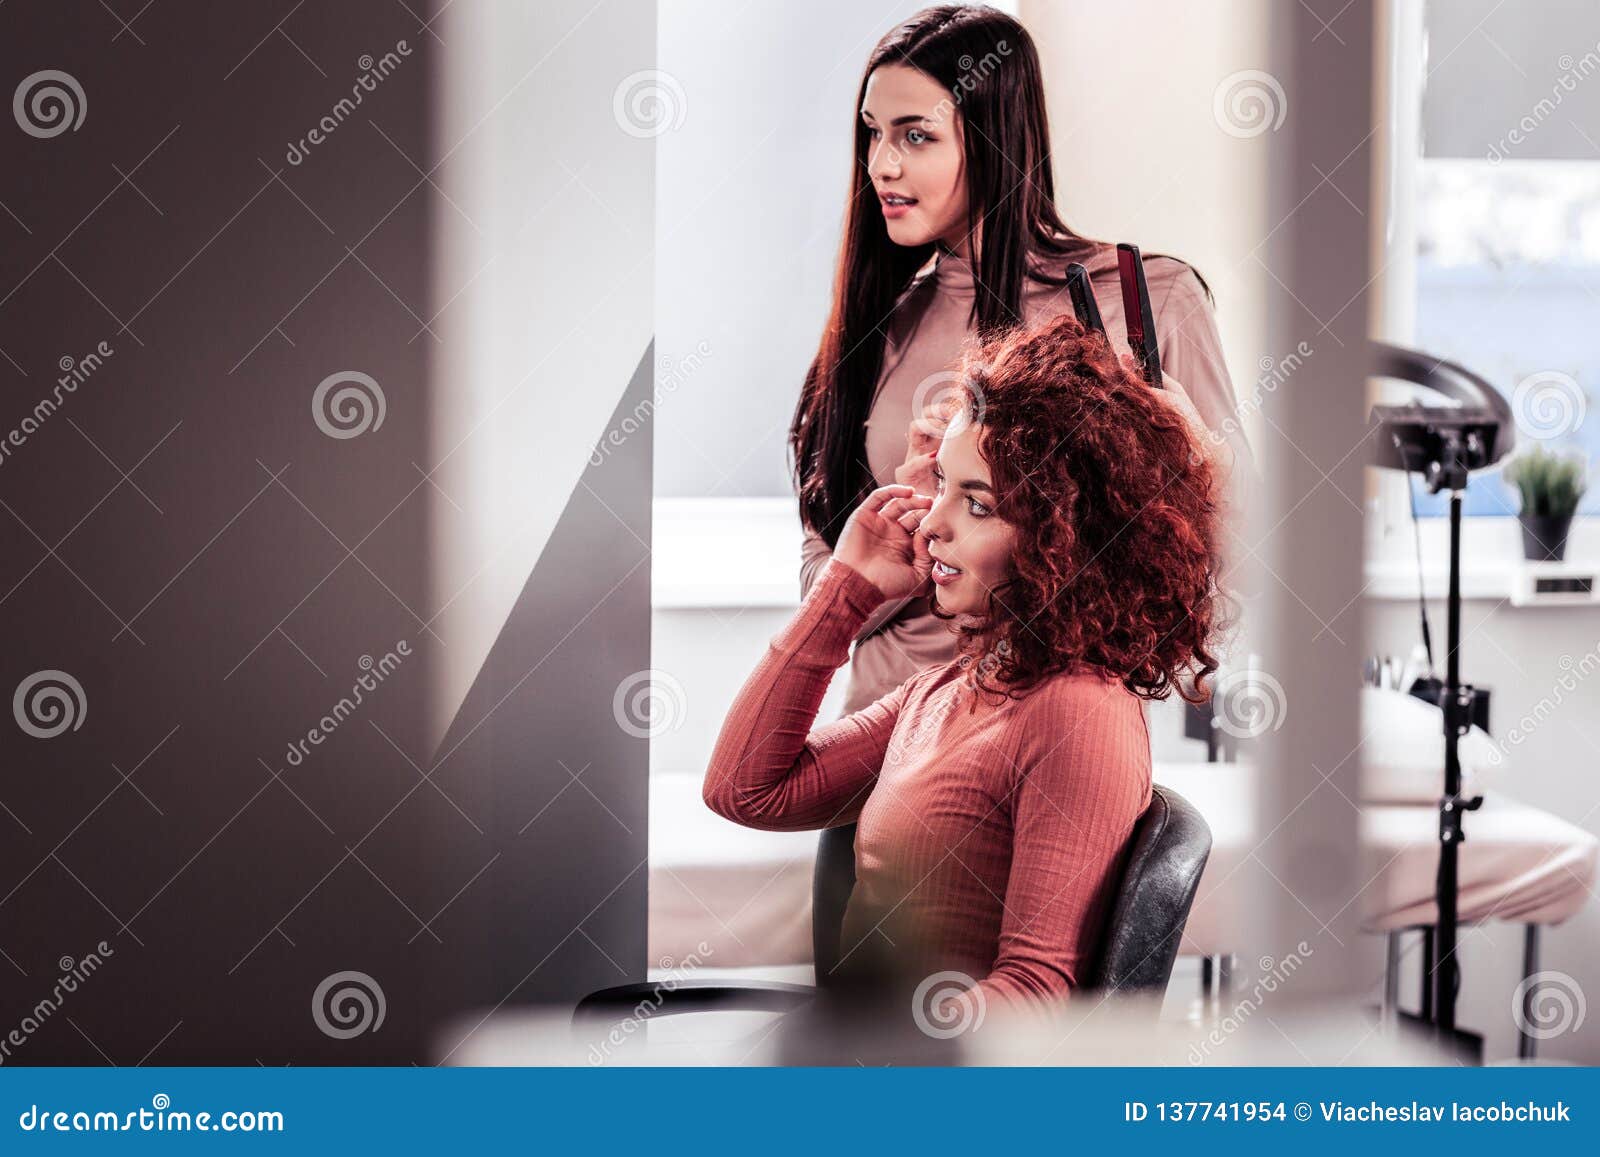 pleasant young woman speaking to her hair stylist